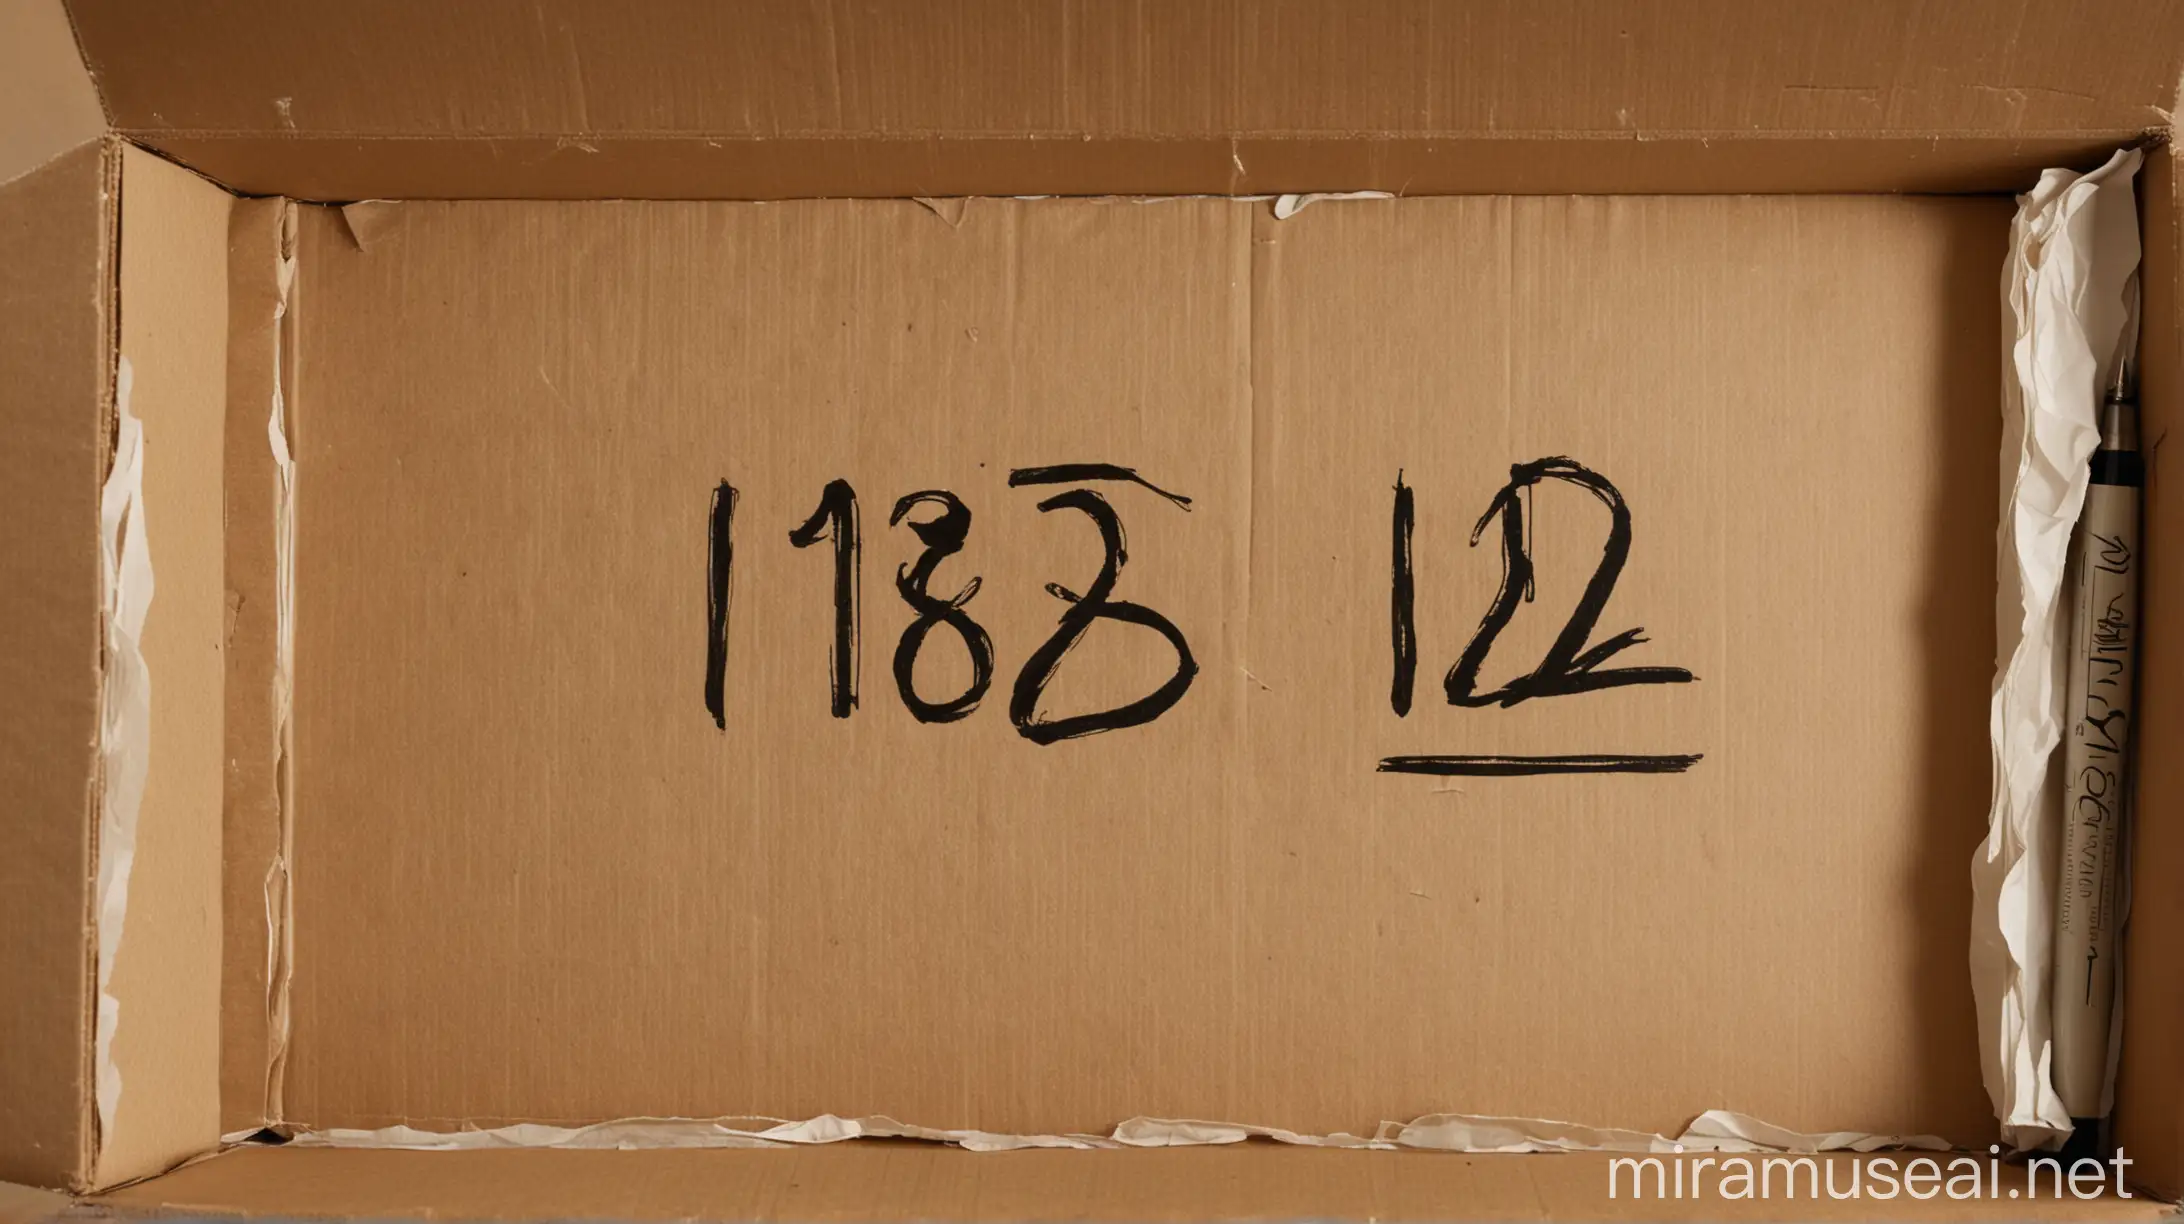 Mysterious Number 1882 Inside Cardboard Box